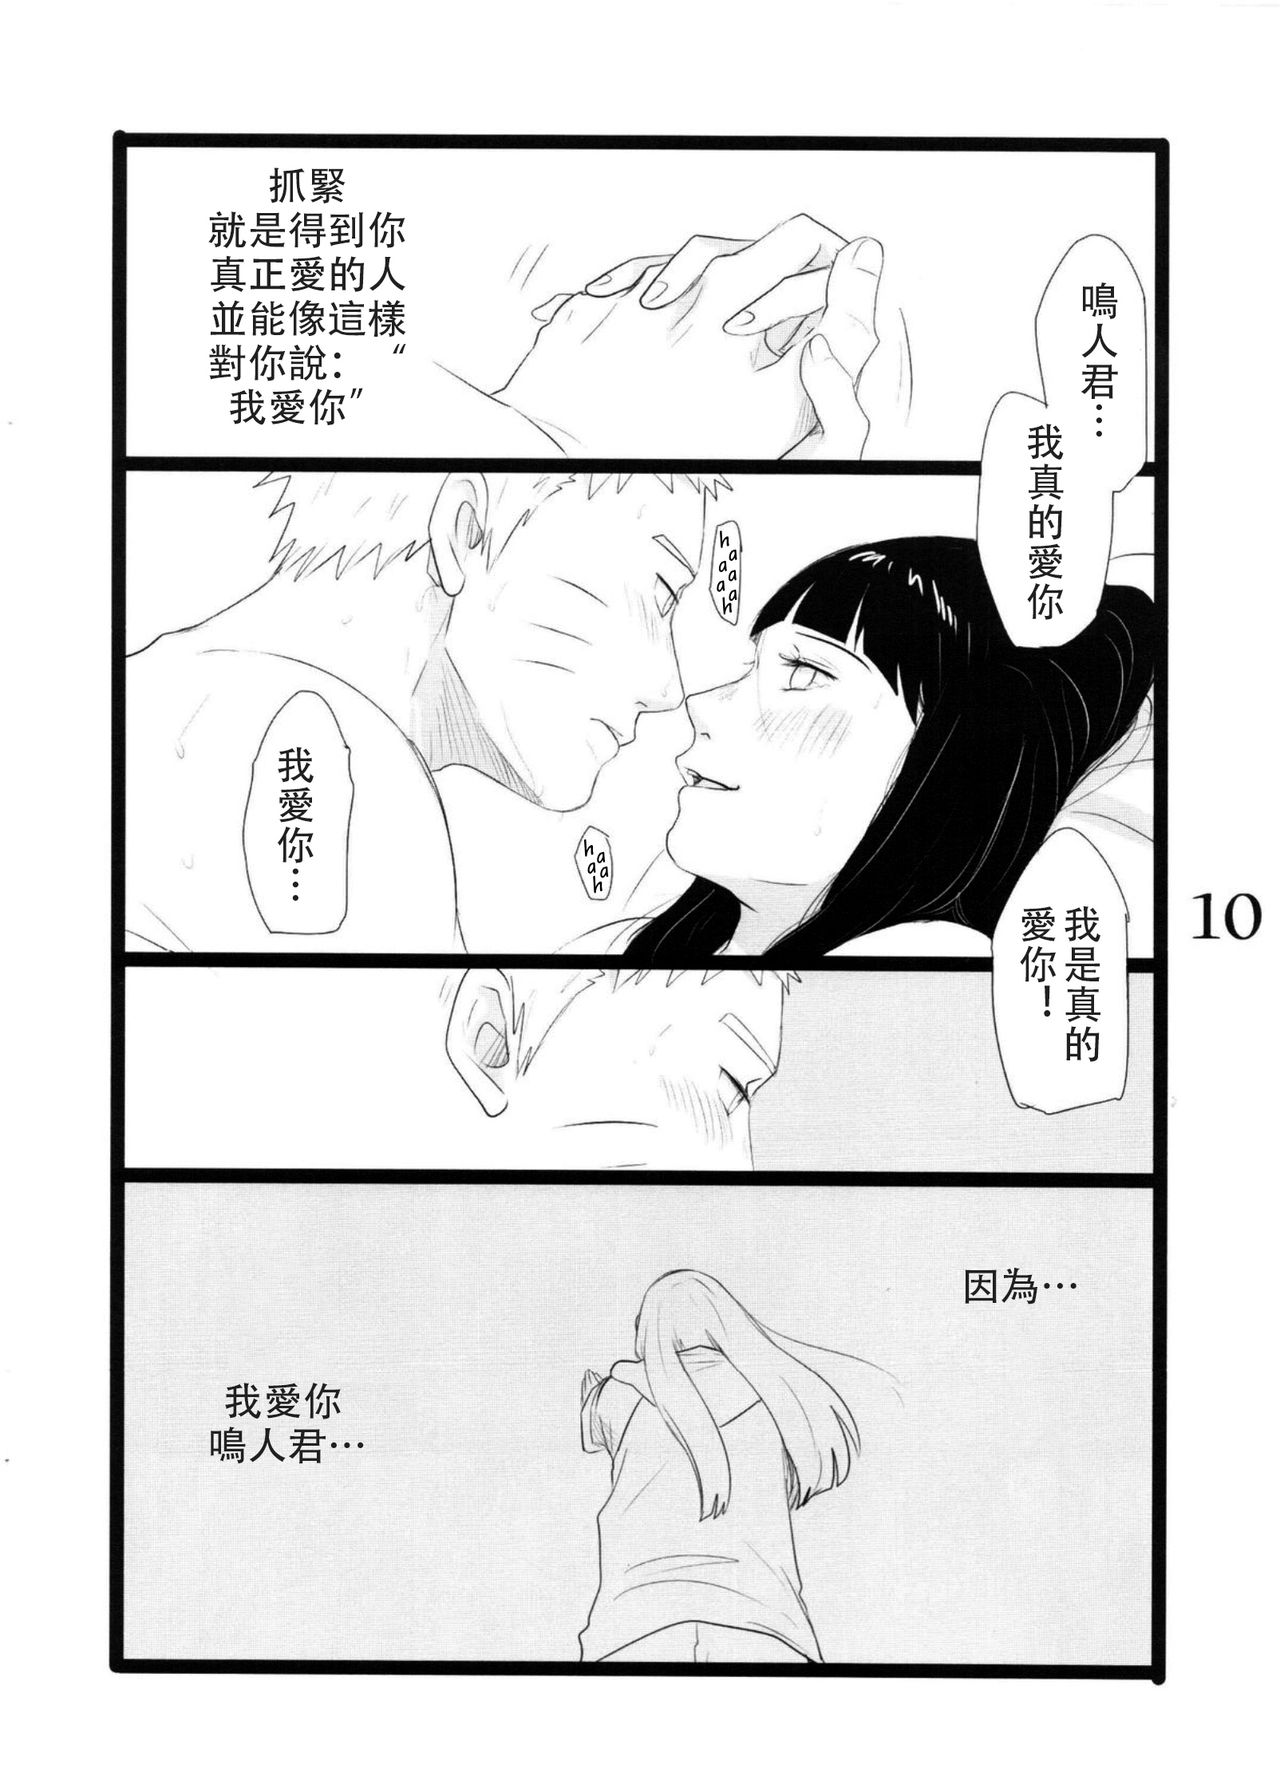 (C88) [blink (shimoyake)] YOUR MY SWEET - I LOVE YOU DARLING (Naruto) [Chinese] [沒有漢化] page 11 full